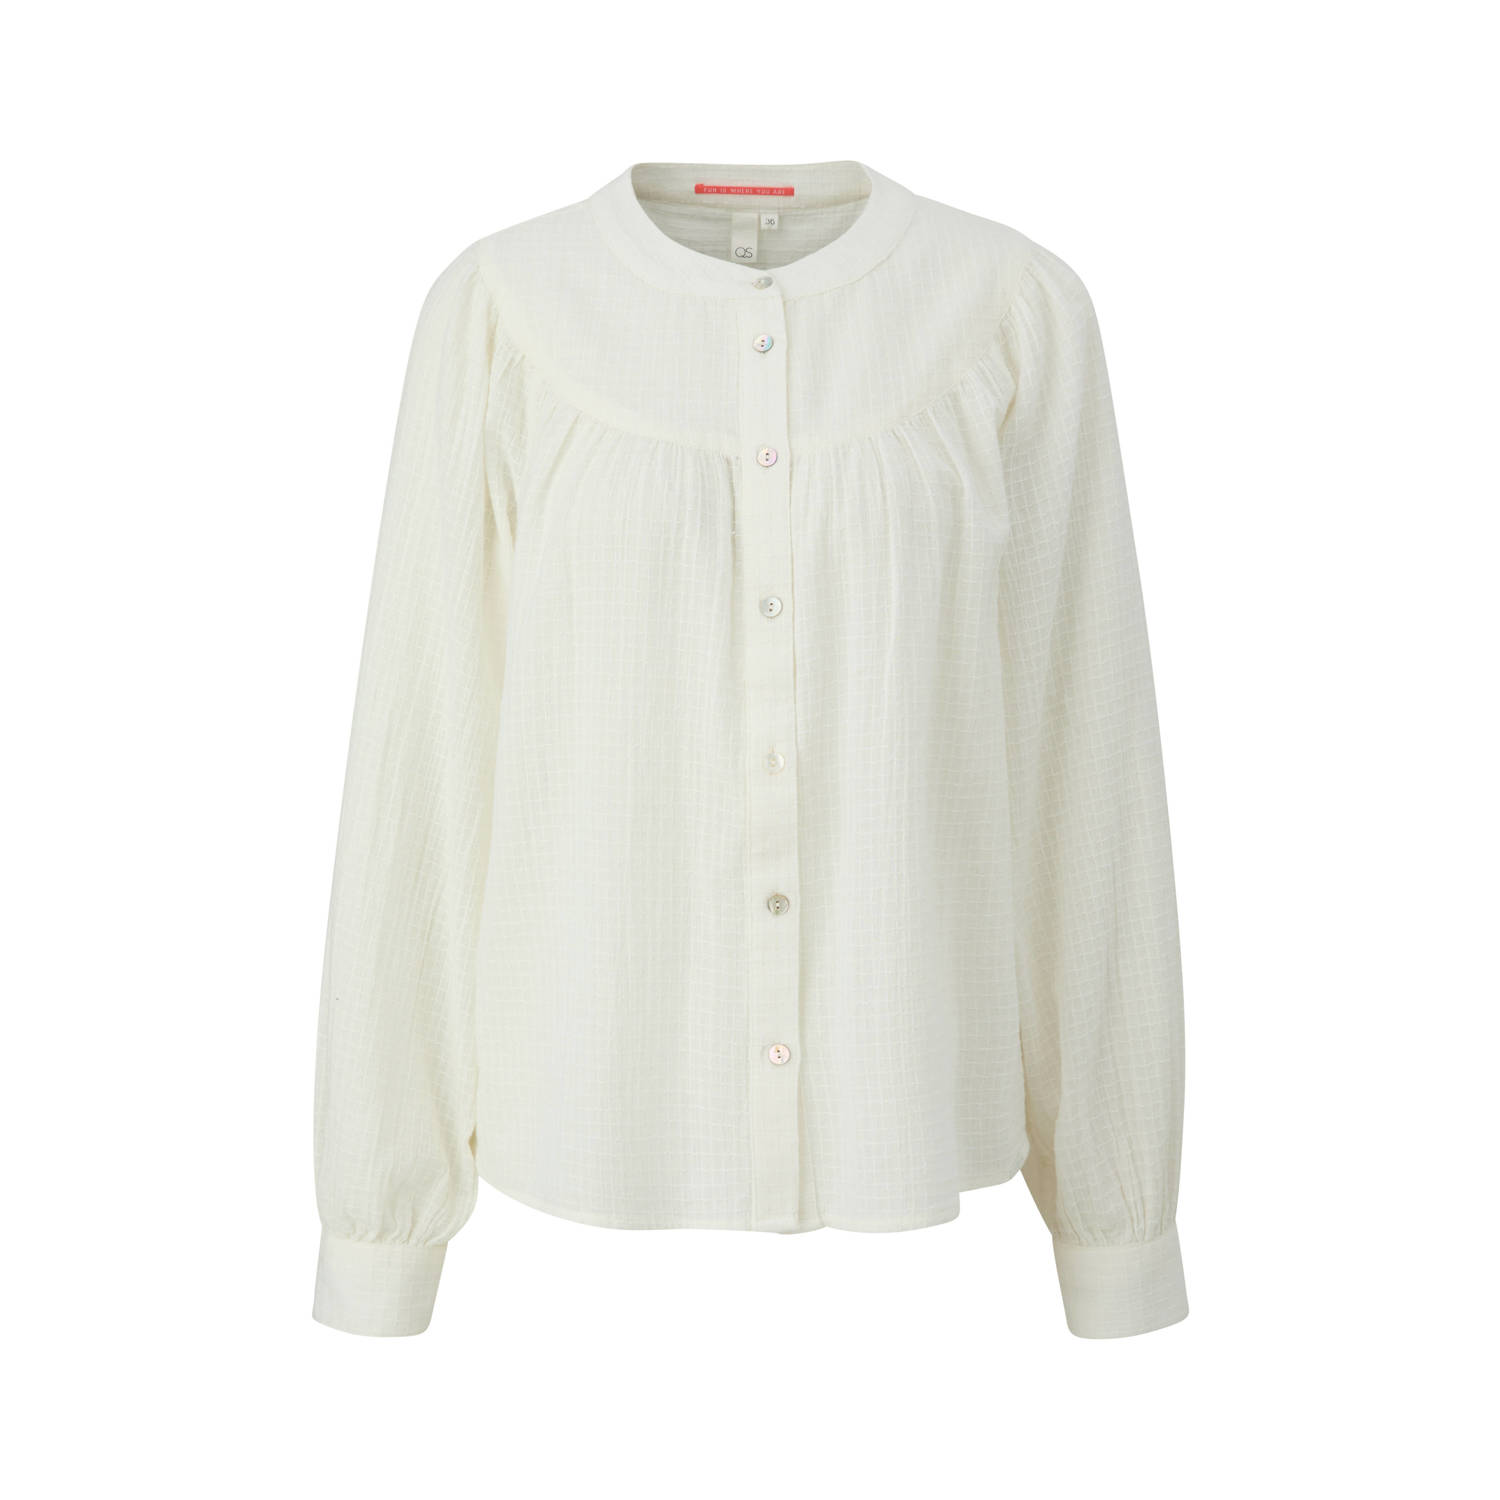 Q S by s.Oliver blouse ecru